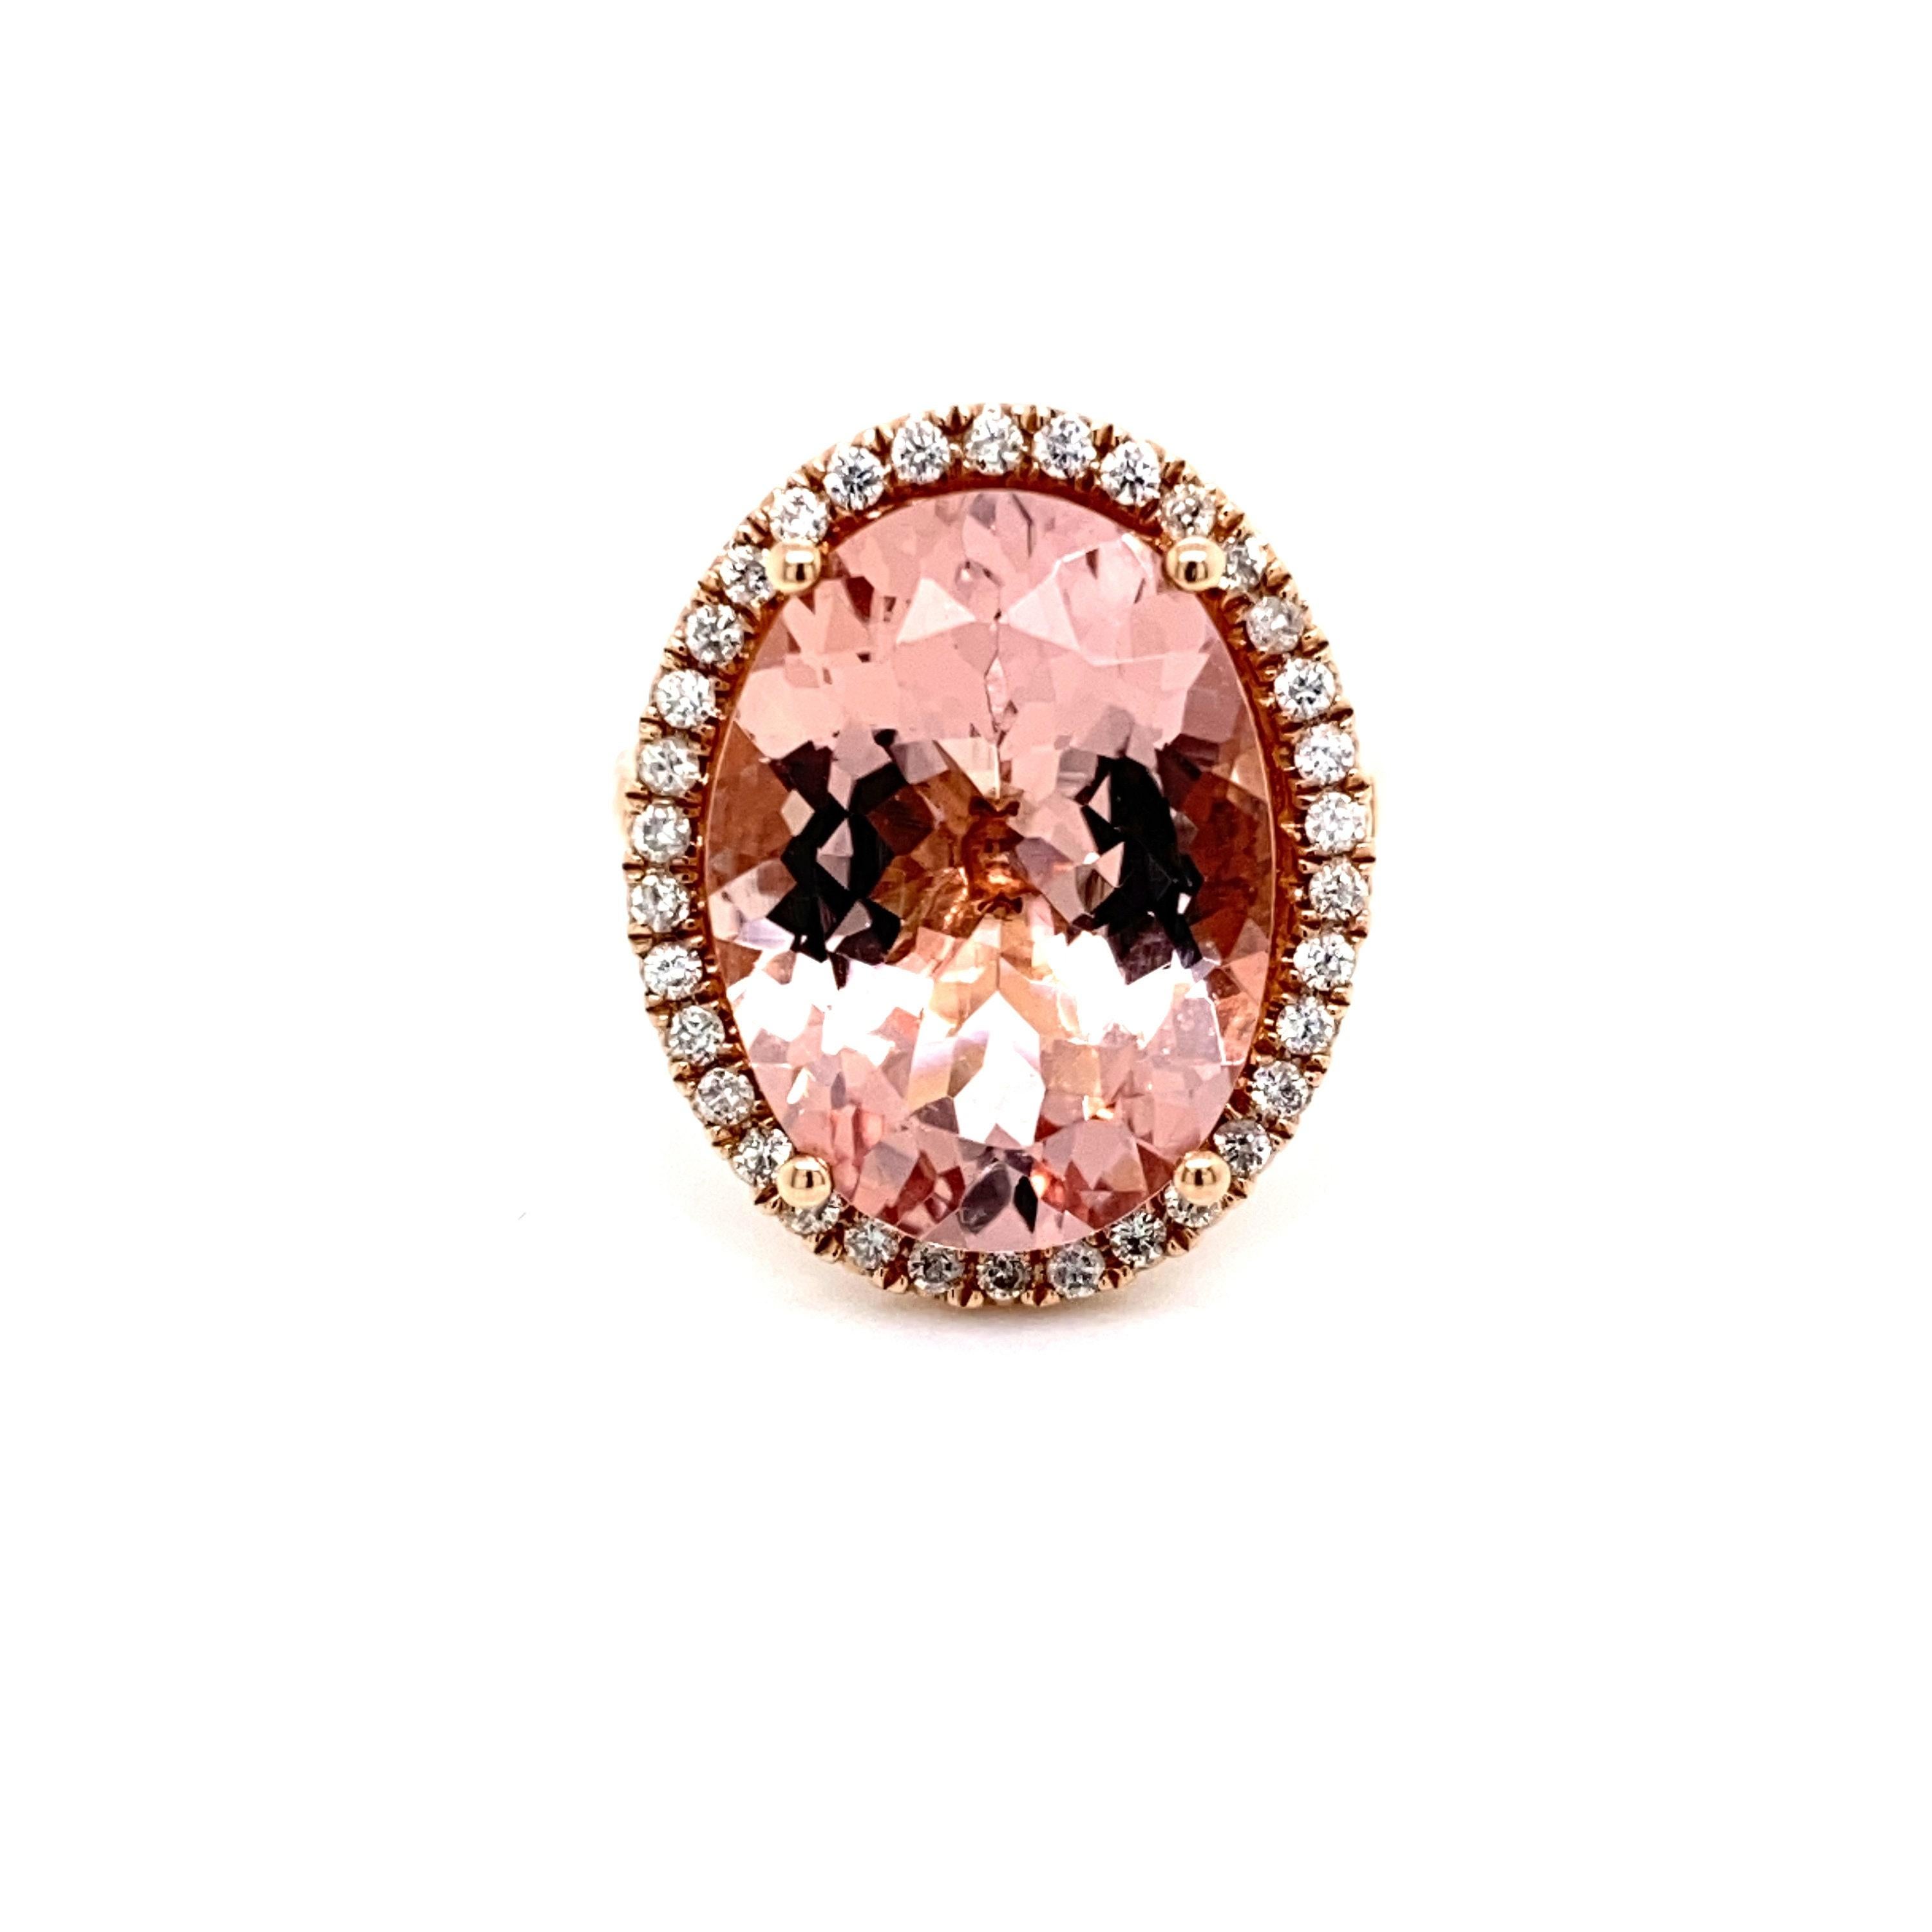 This is a magnificent natural 11.06 morganite and diamond halo ring set in solid 14K rose gold. The natural and large 18X13MM Morganite oval has an excellent peachy pink color (AAA quality gem) and is set on top of a gorgeous diamond encrusted